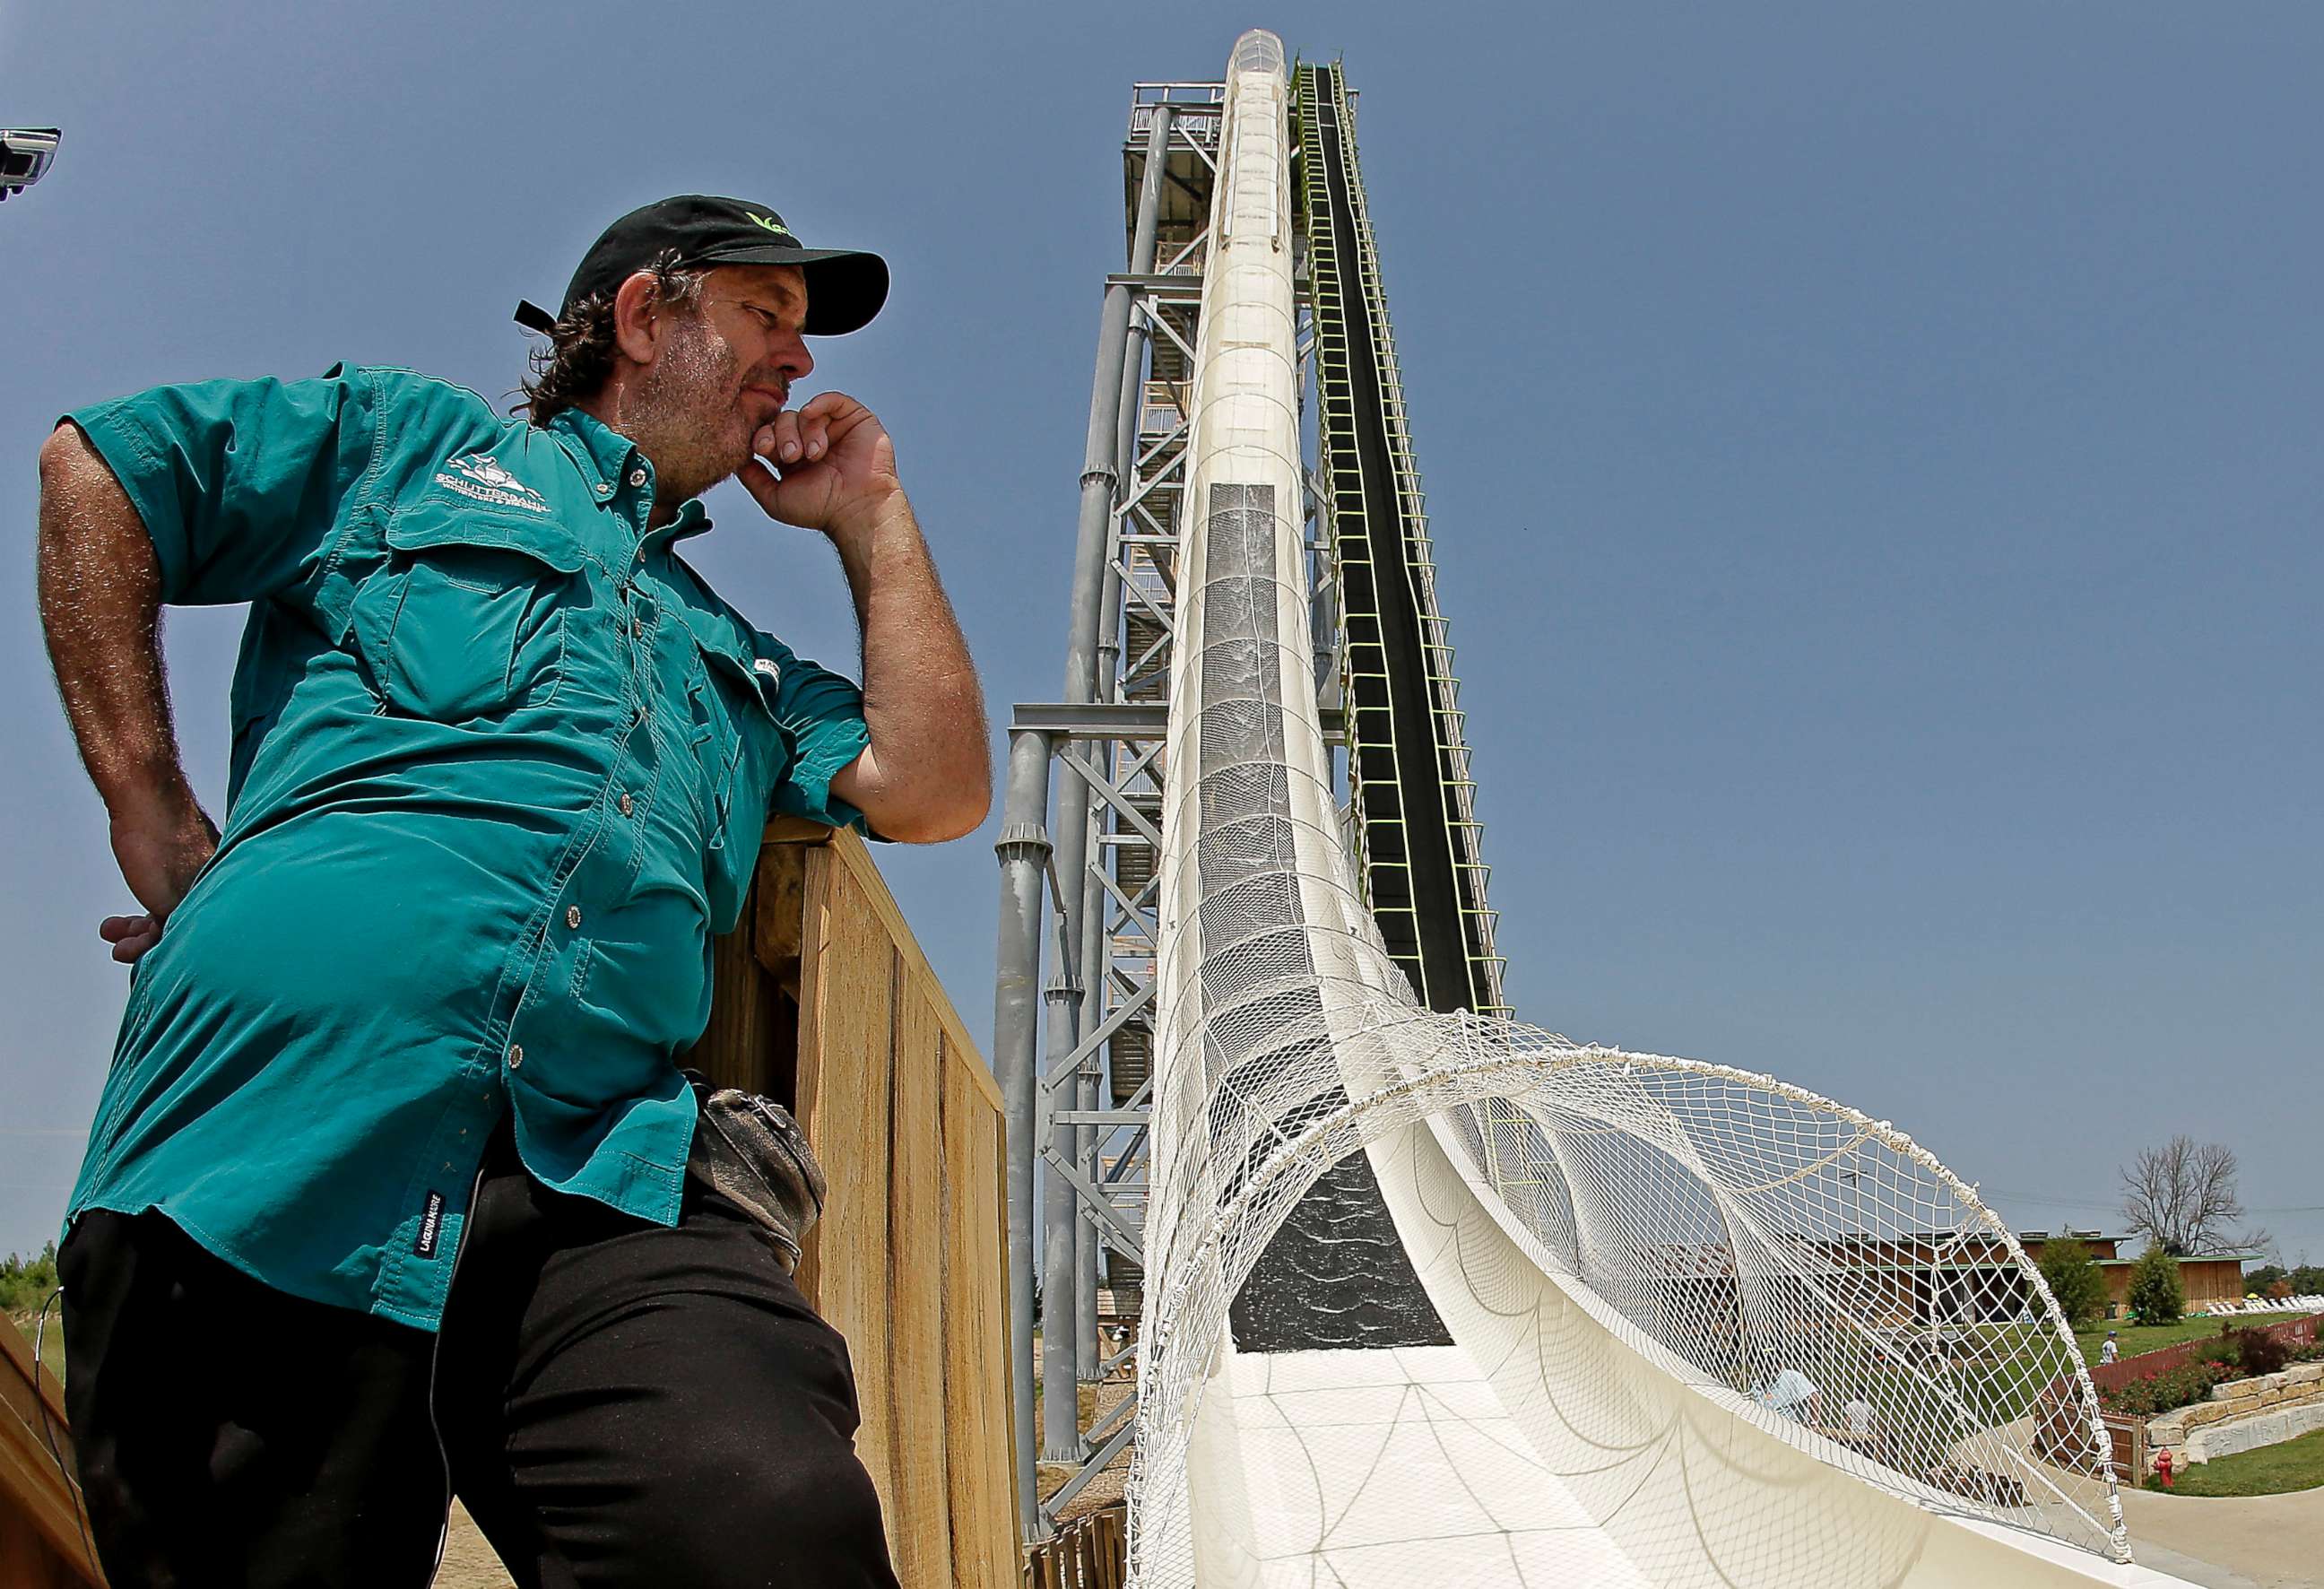 PHOTO: In this July 9, 2014, file photo, ride designer Jeffery Henry looks over his creation, the world's tallest waterslide called "Verruckt" at Schlitterbahn Waterpark in Kansas City, Kan.